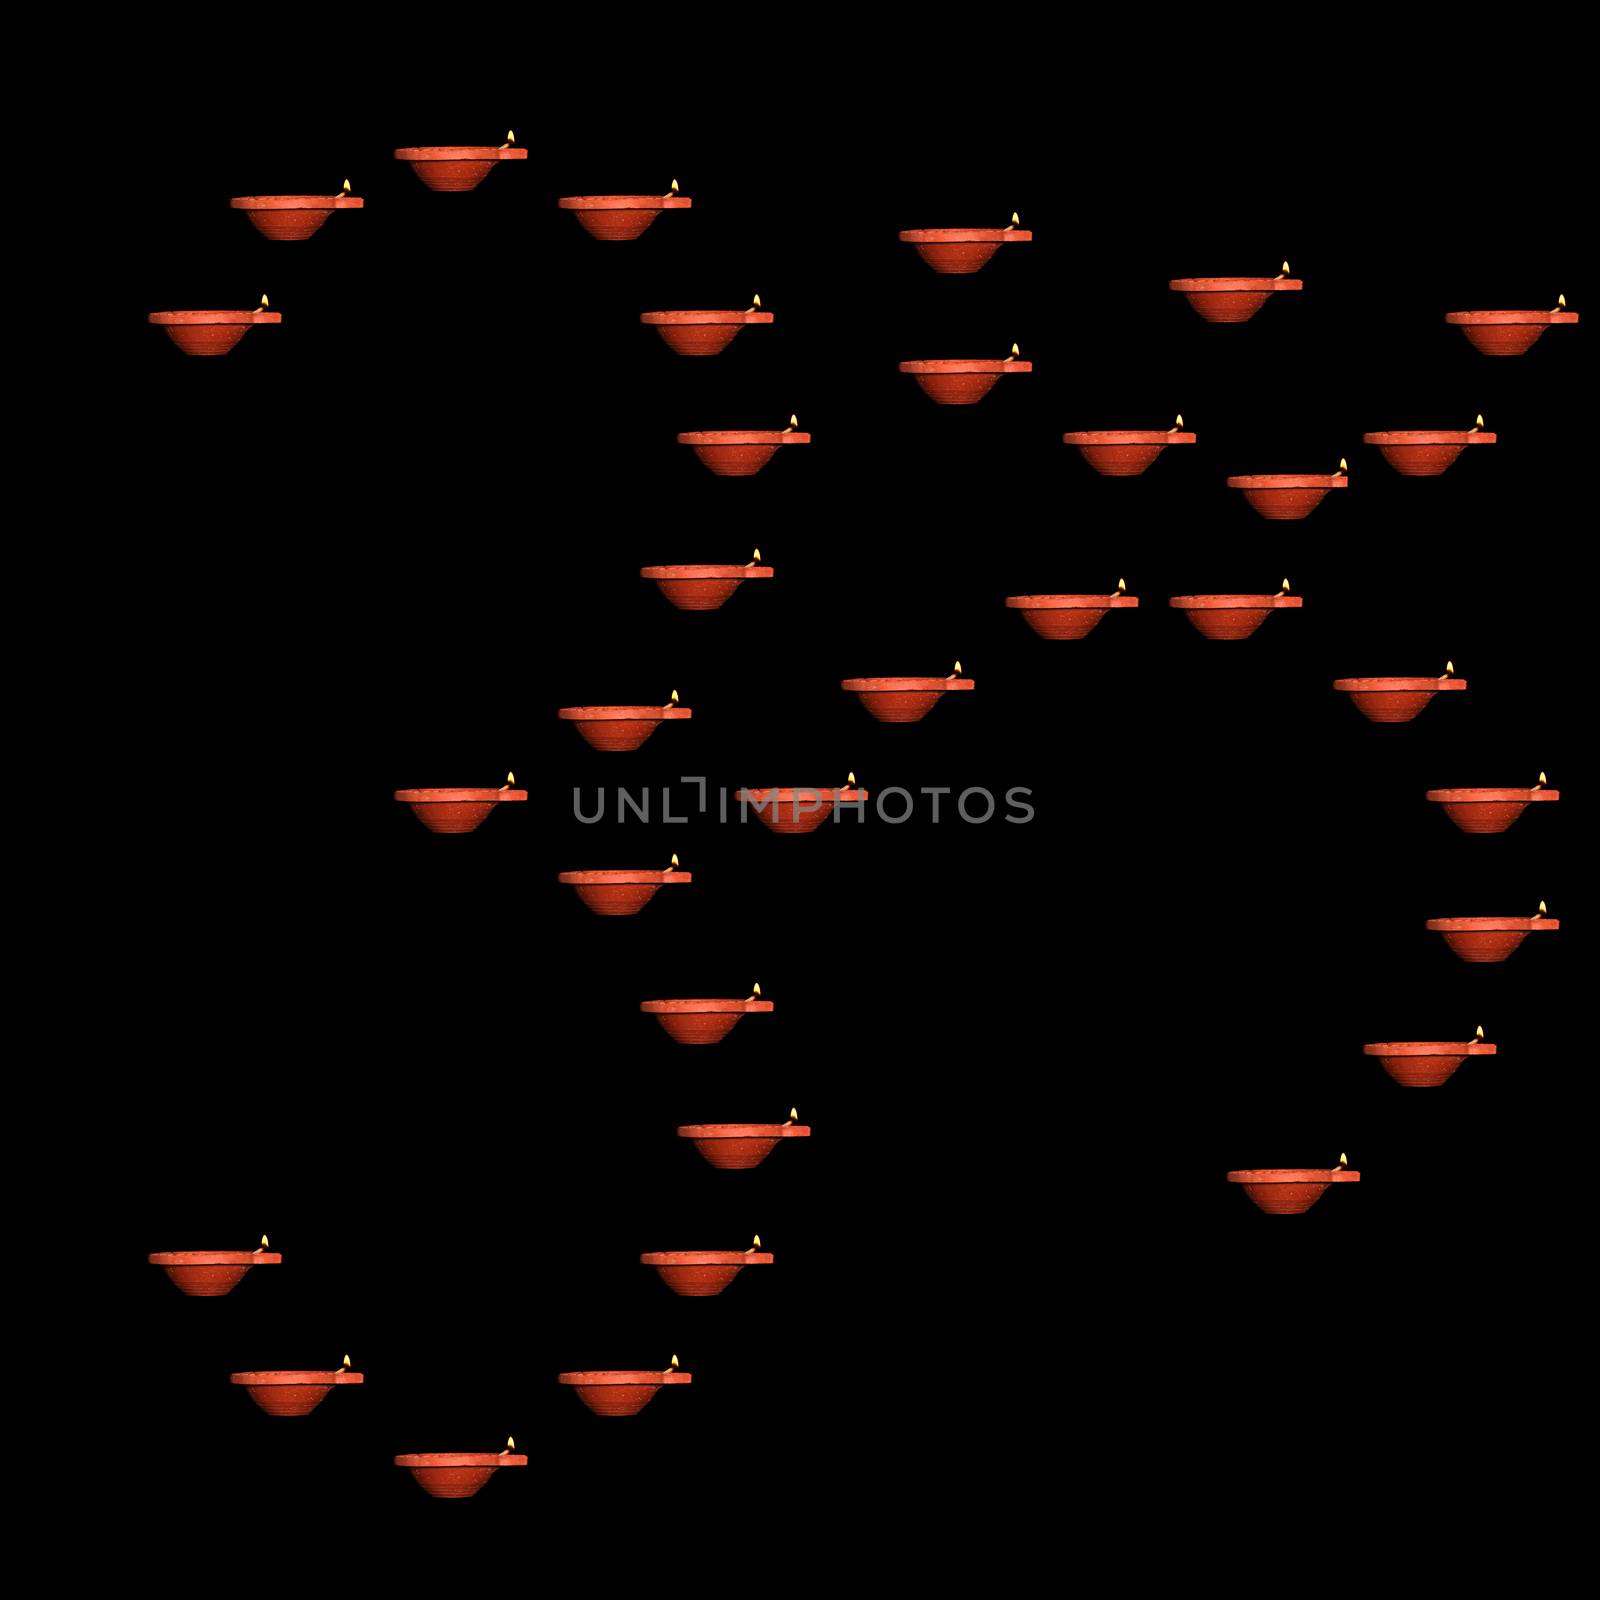 The holy Hindu auspicious symbol of OM made of traditional earthen Diwali Lamps on black background.